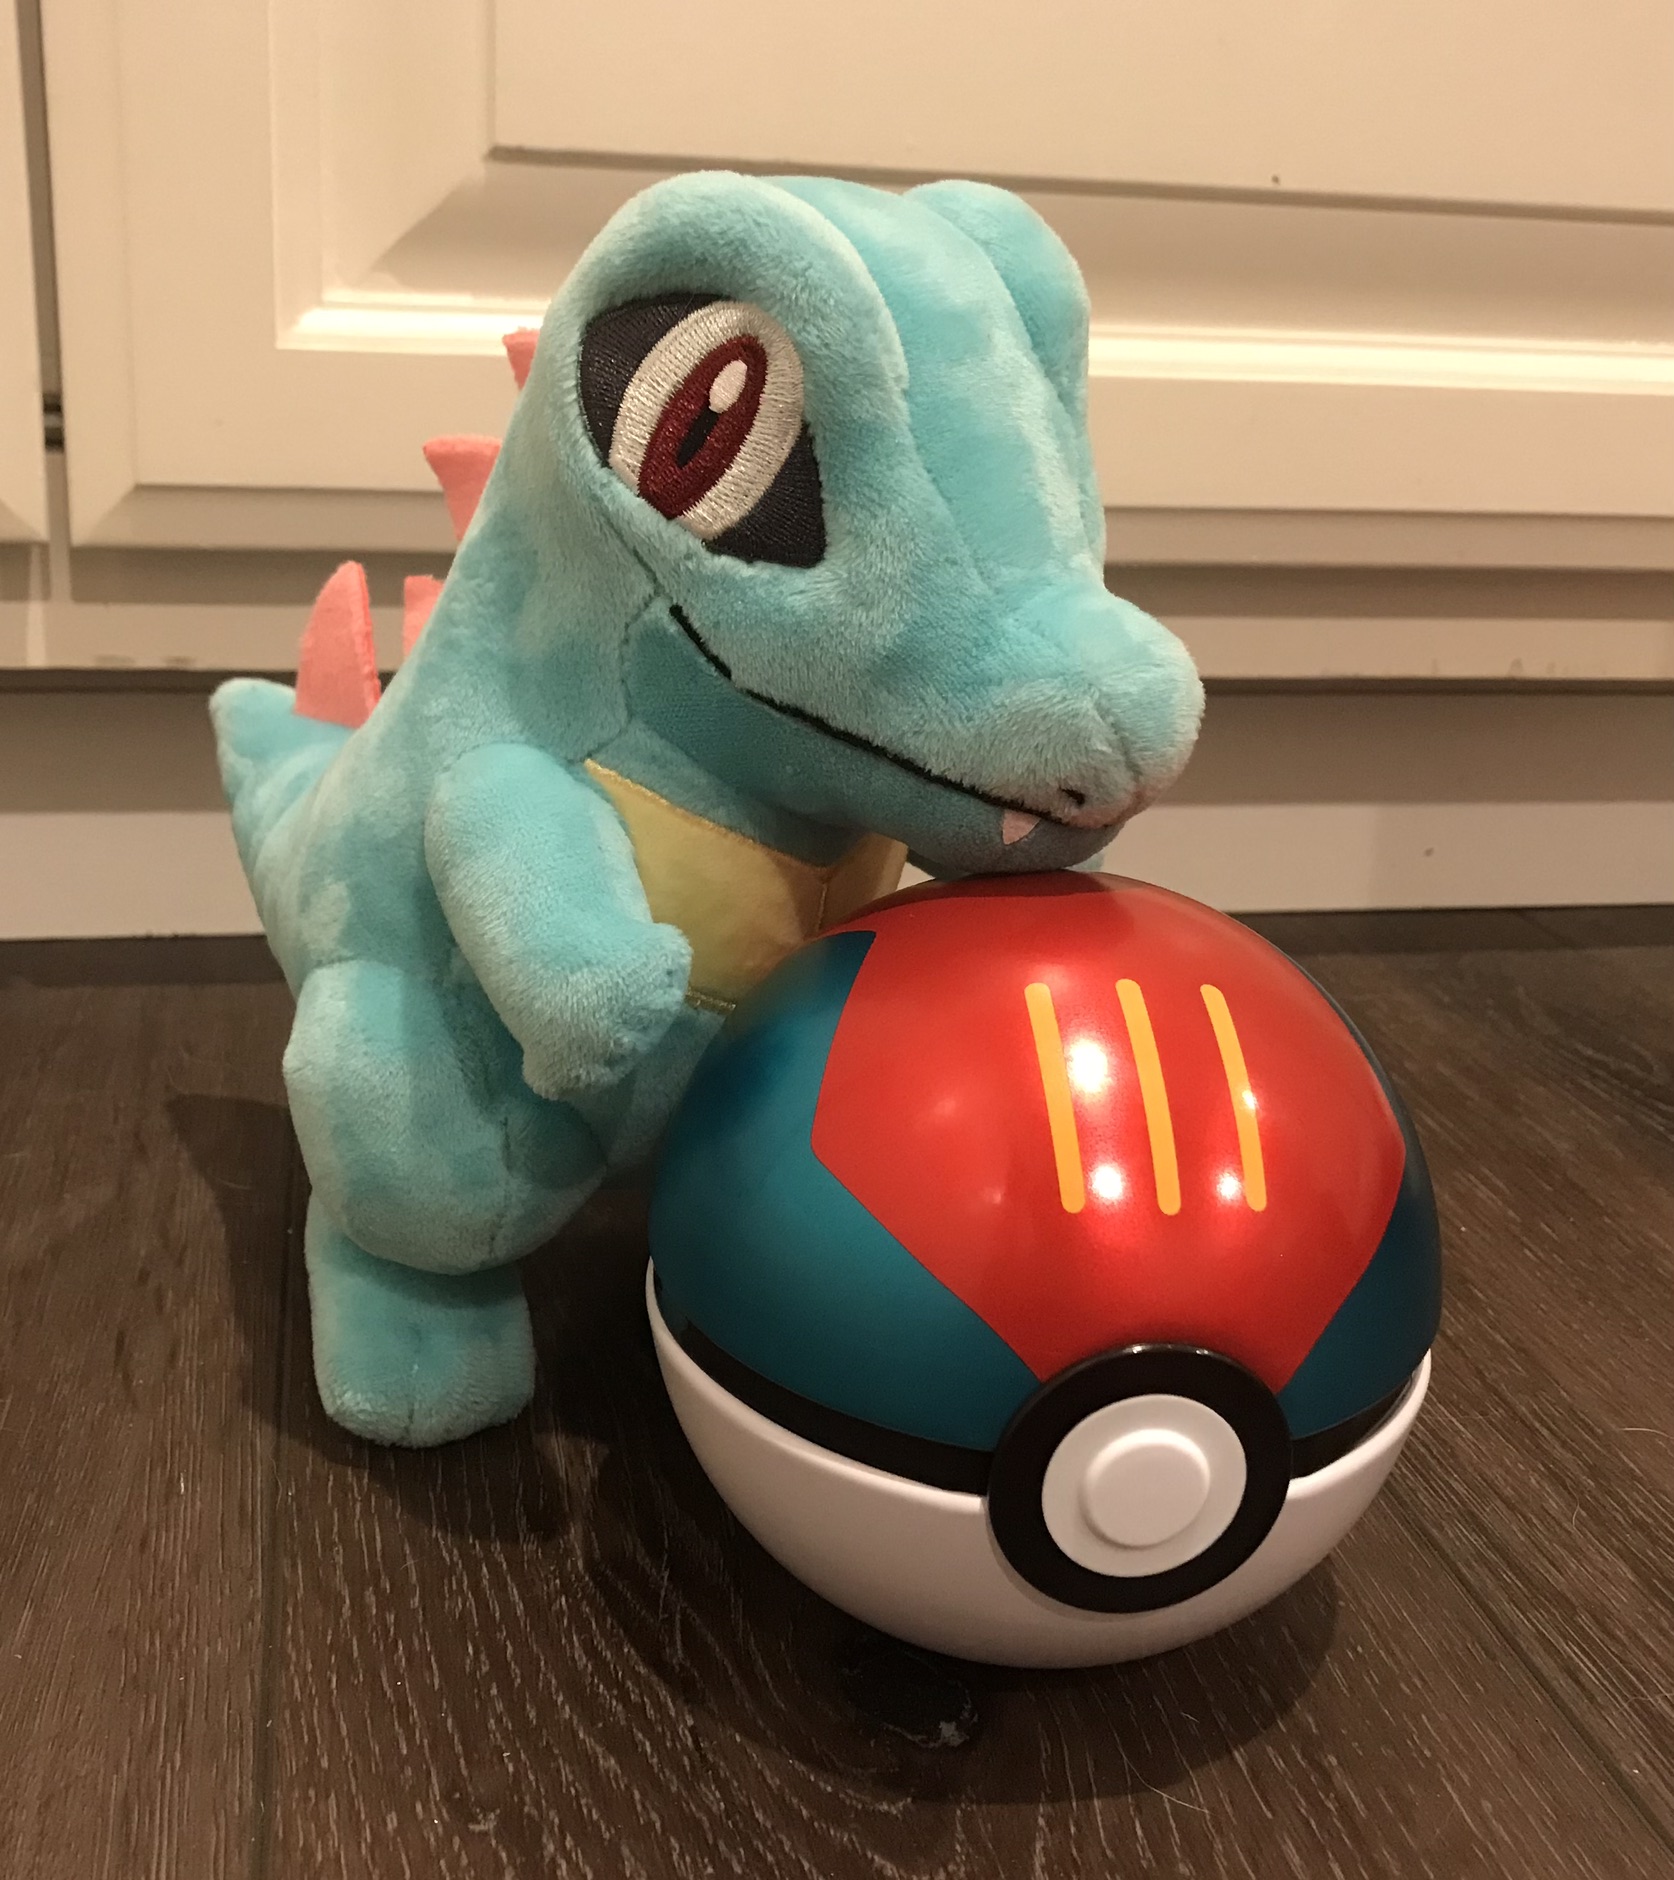 16-bit pixel pig on X: Totodile found a poké ball it likes! This